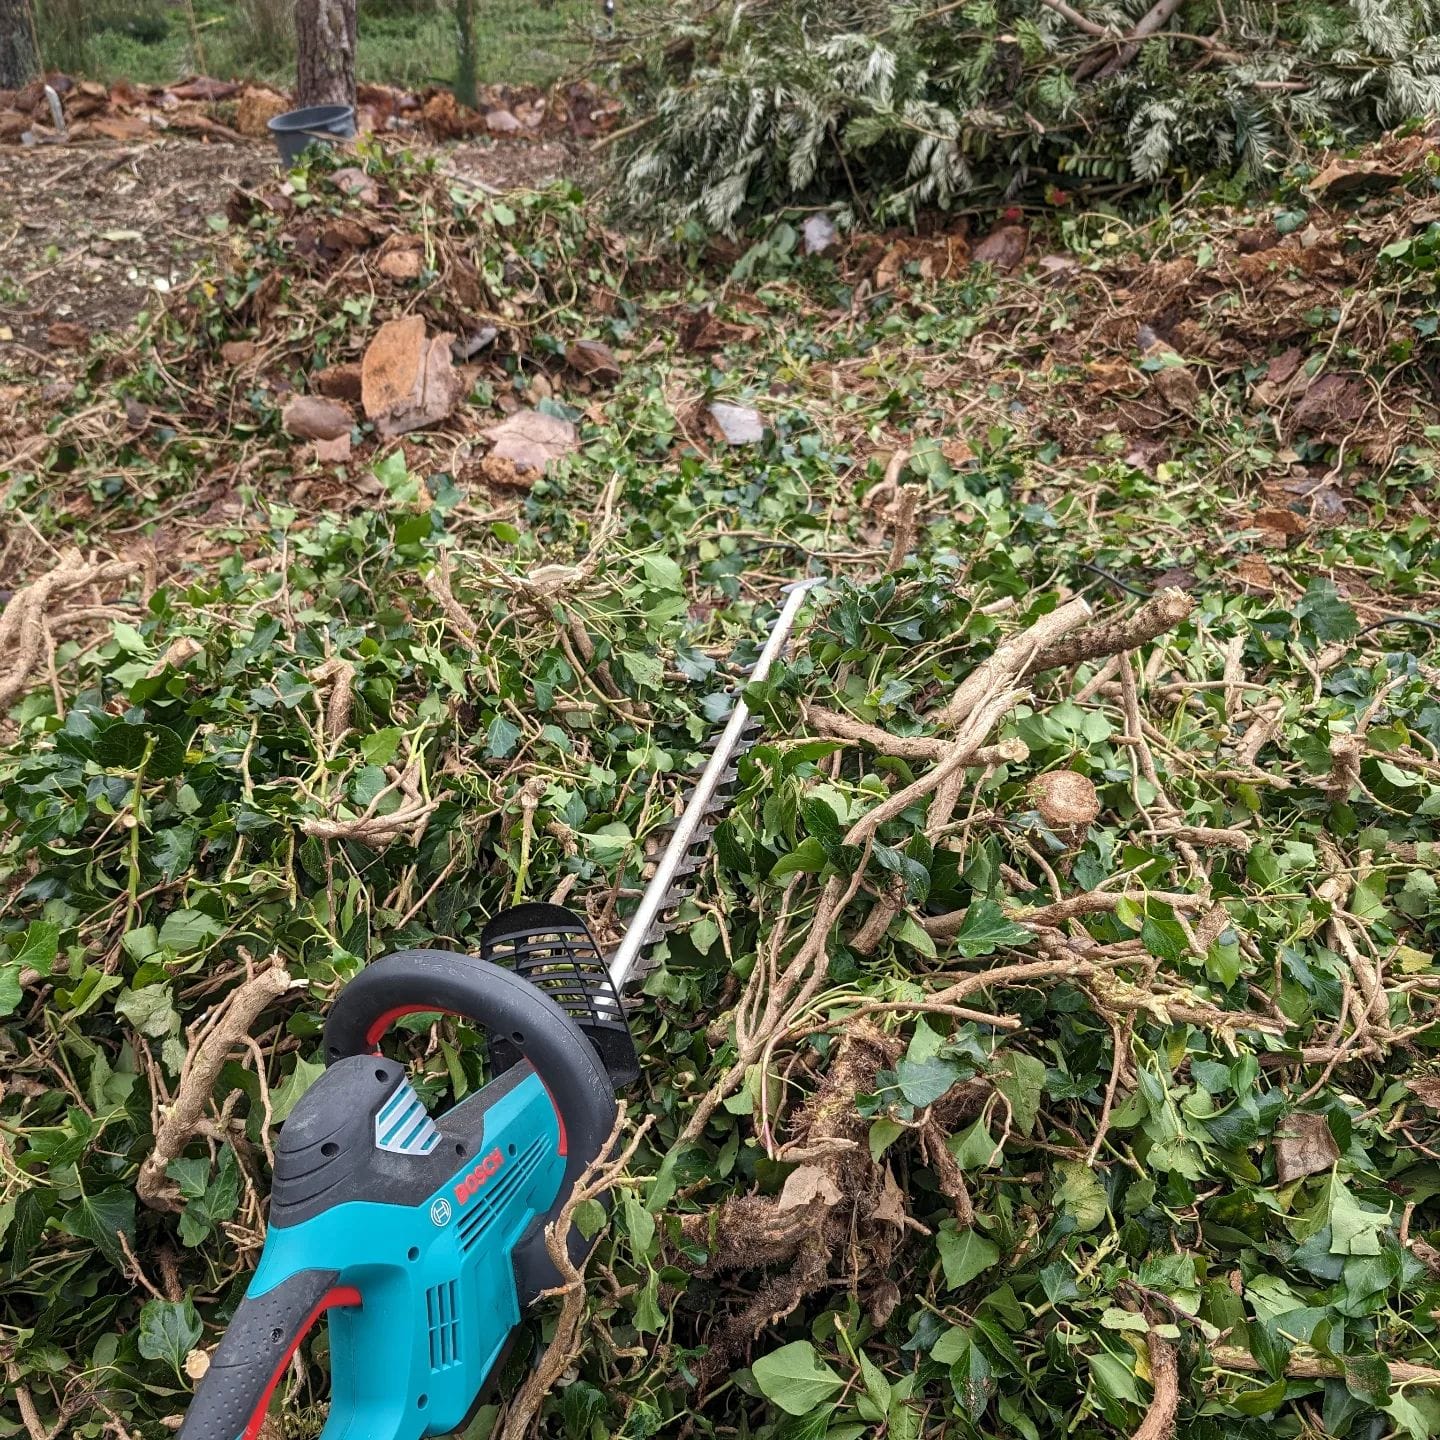 Using an electric (plug in) hedge trimmer to break down branchy biomass dropped off by the cleaning crew